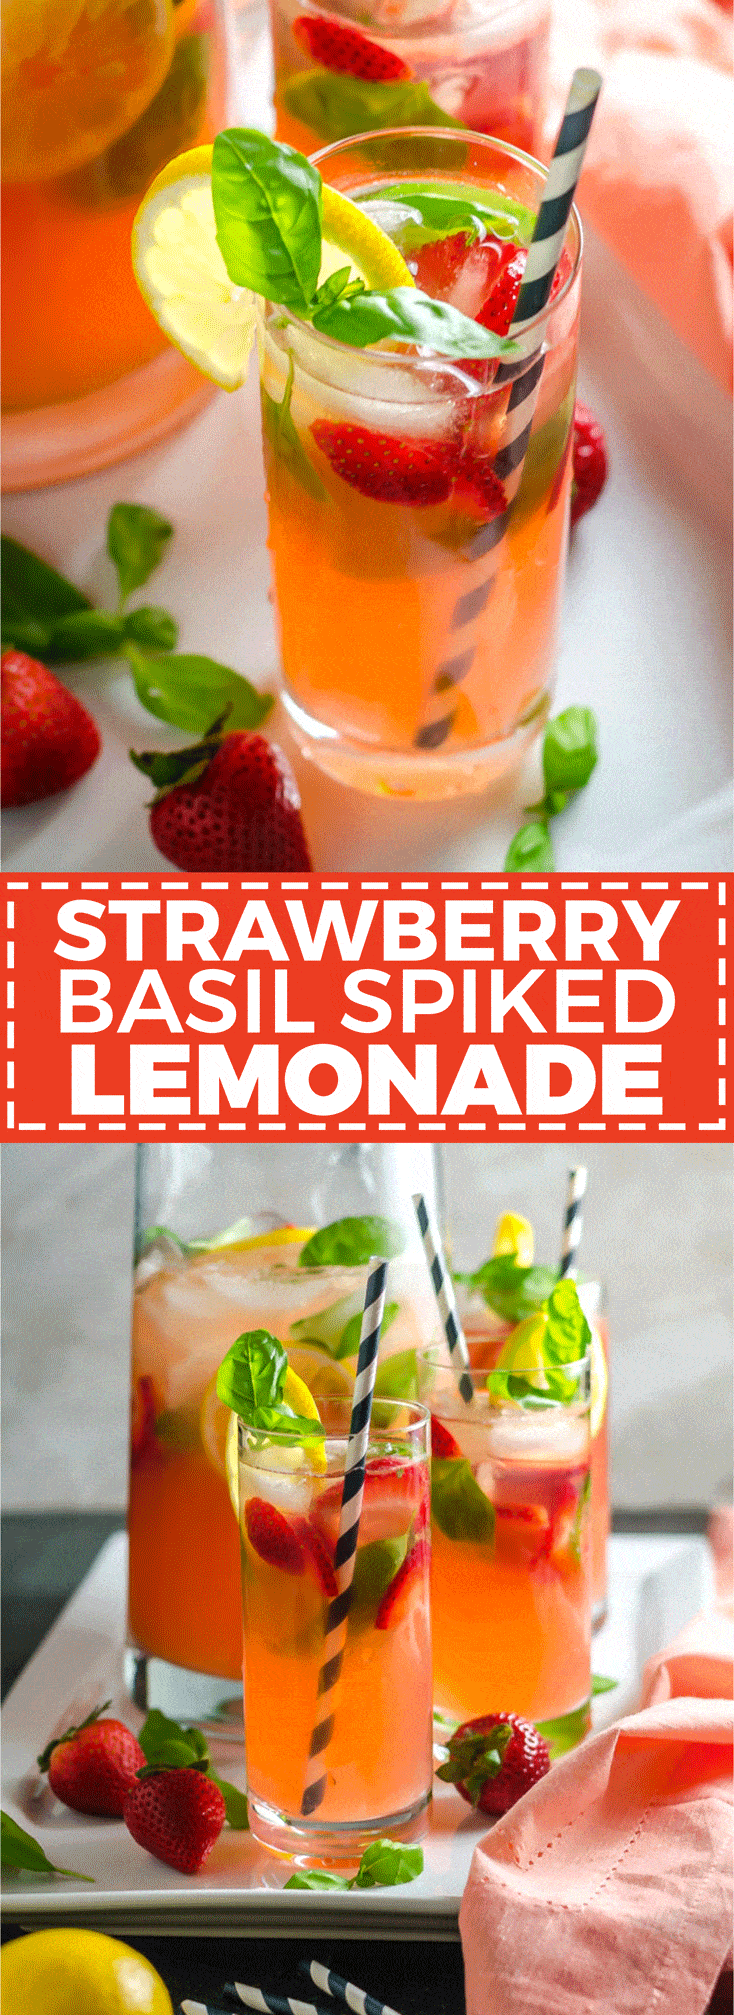 Strawberry Basil Spiked Lemonade. This vodka-spiked cocktail is fruity, refreshing, and perfect for summer. | hostthetoast.com